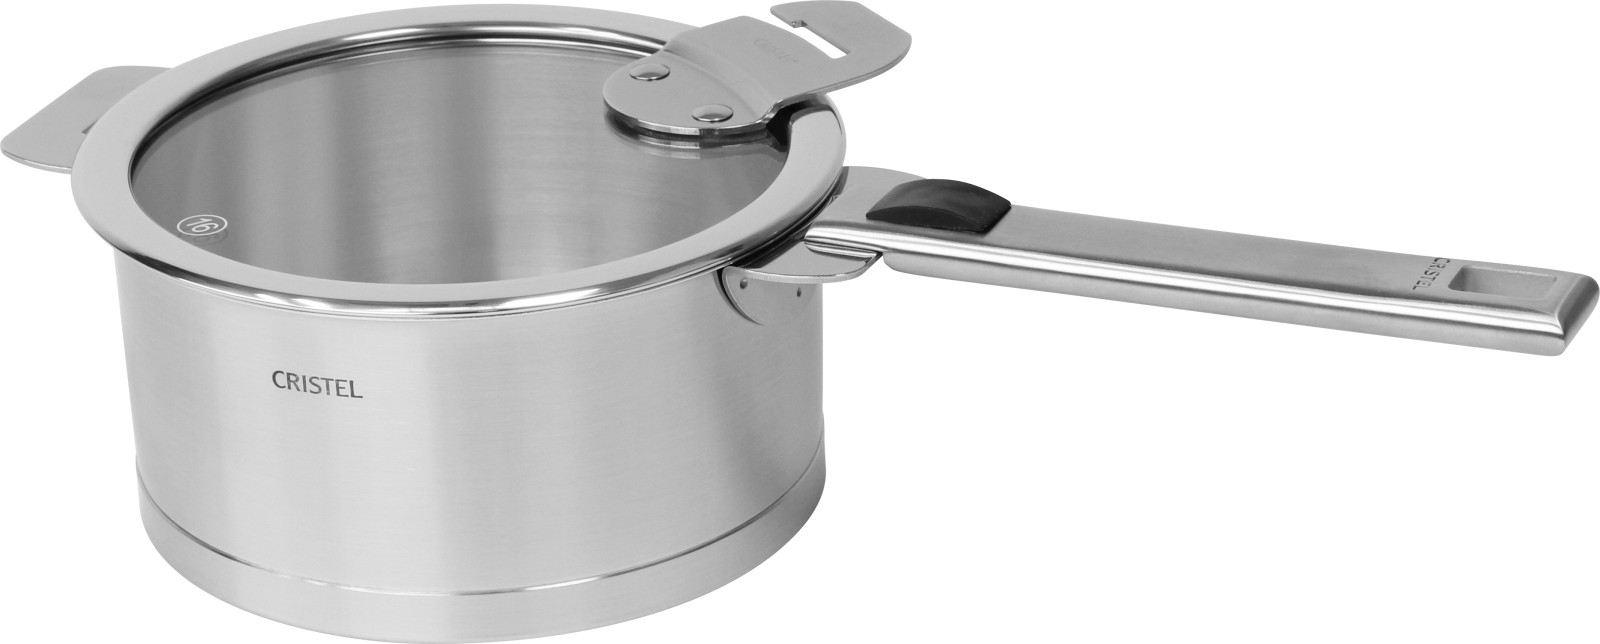 CRISTEL 3-Ply Stainless Steel Saucepan Set (16, 18 and 20cm) with  Detachable Black Handle